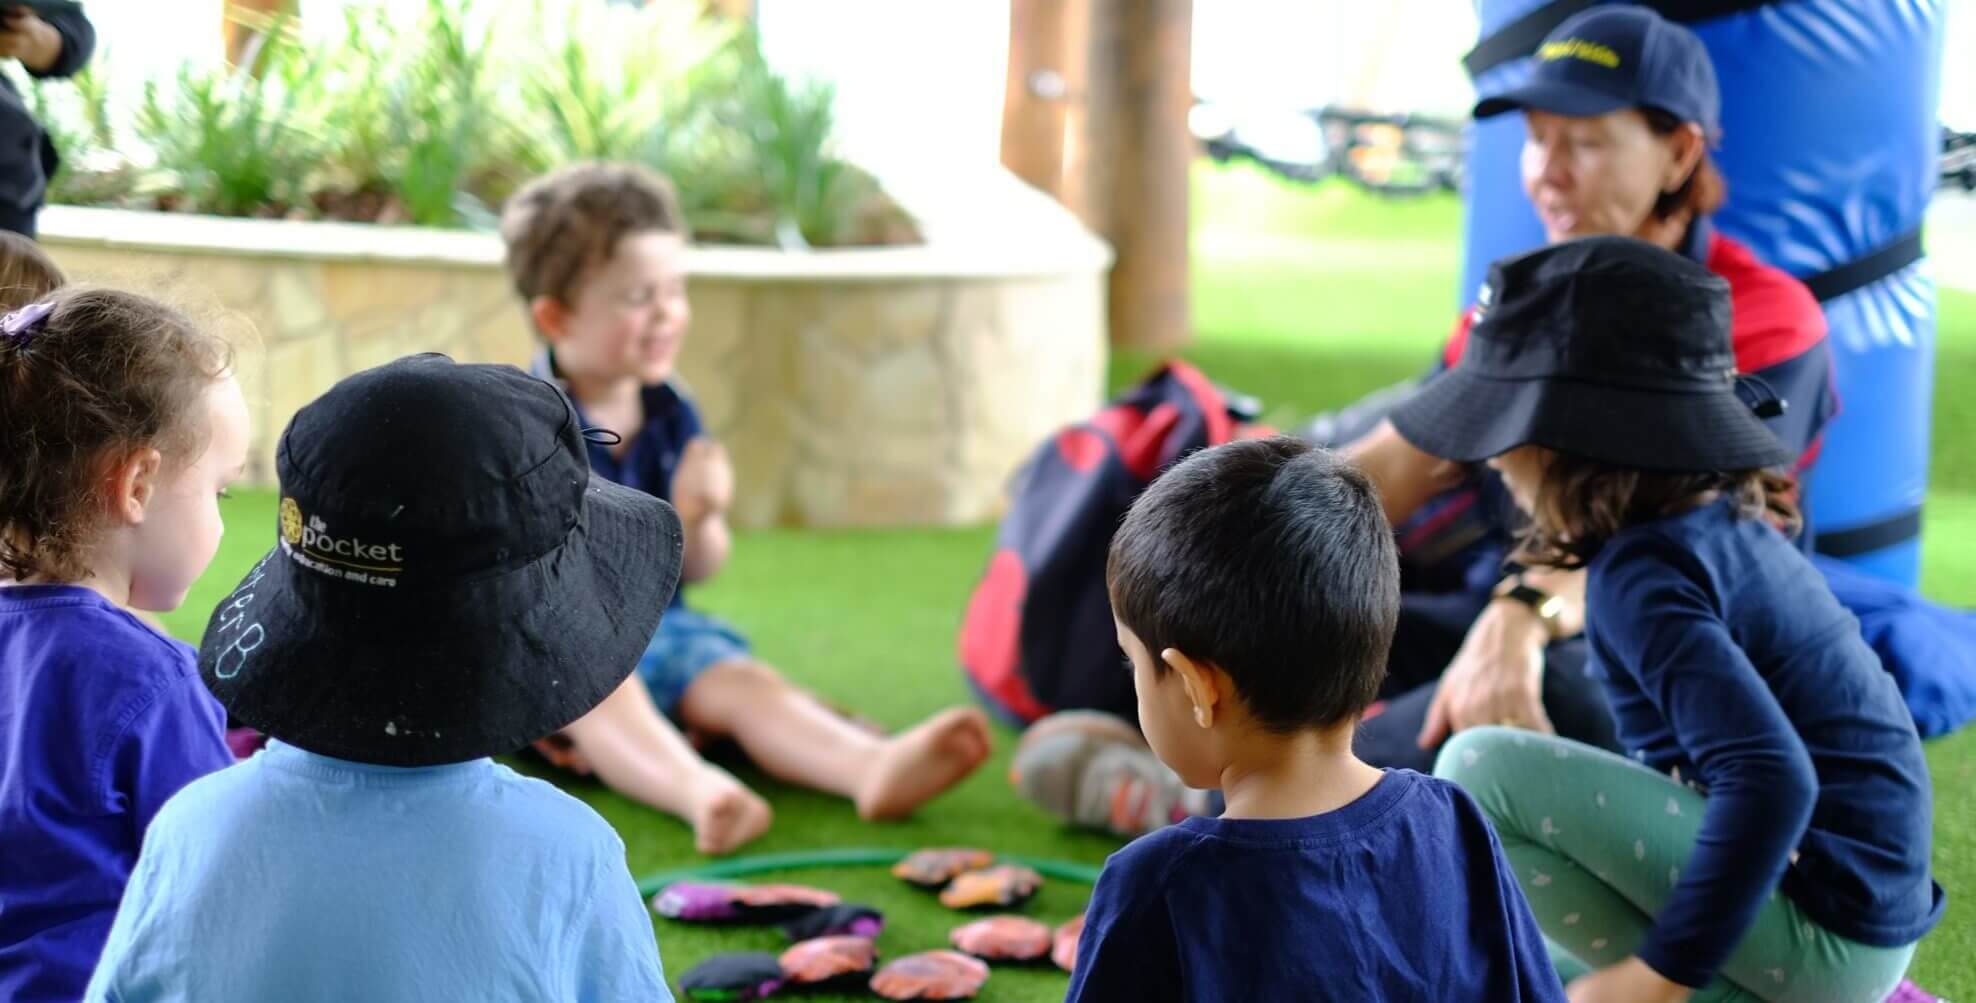 Children learn through completing "work" as a part of Montessori Method of education